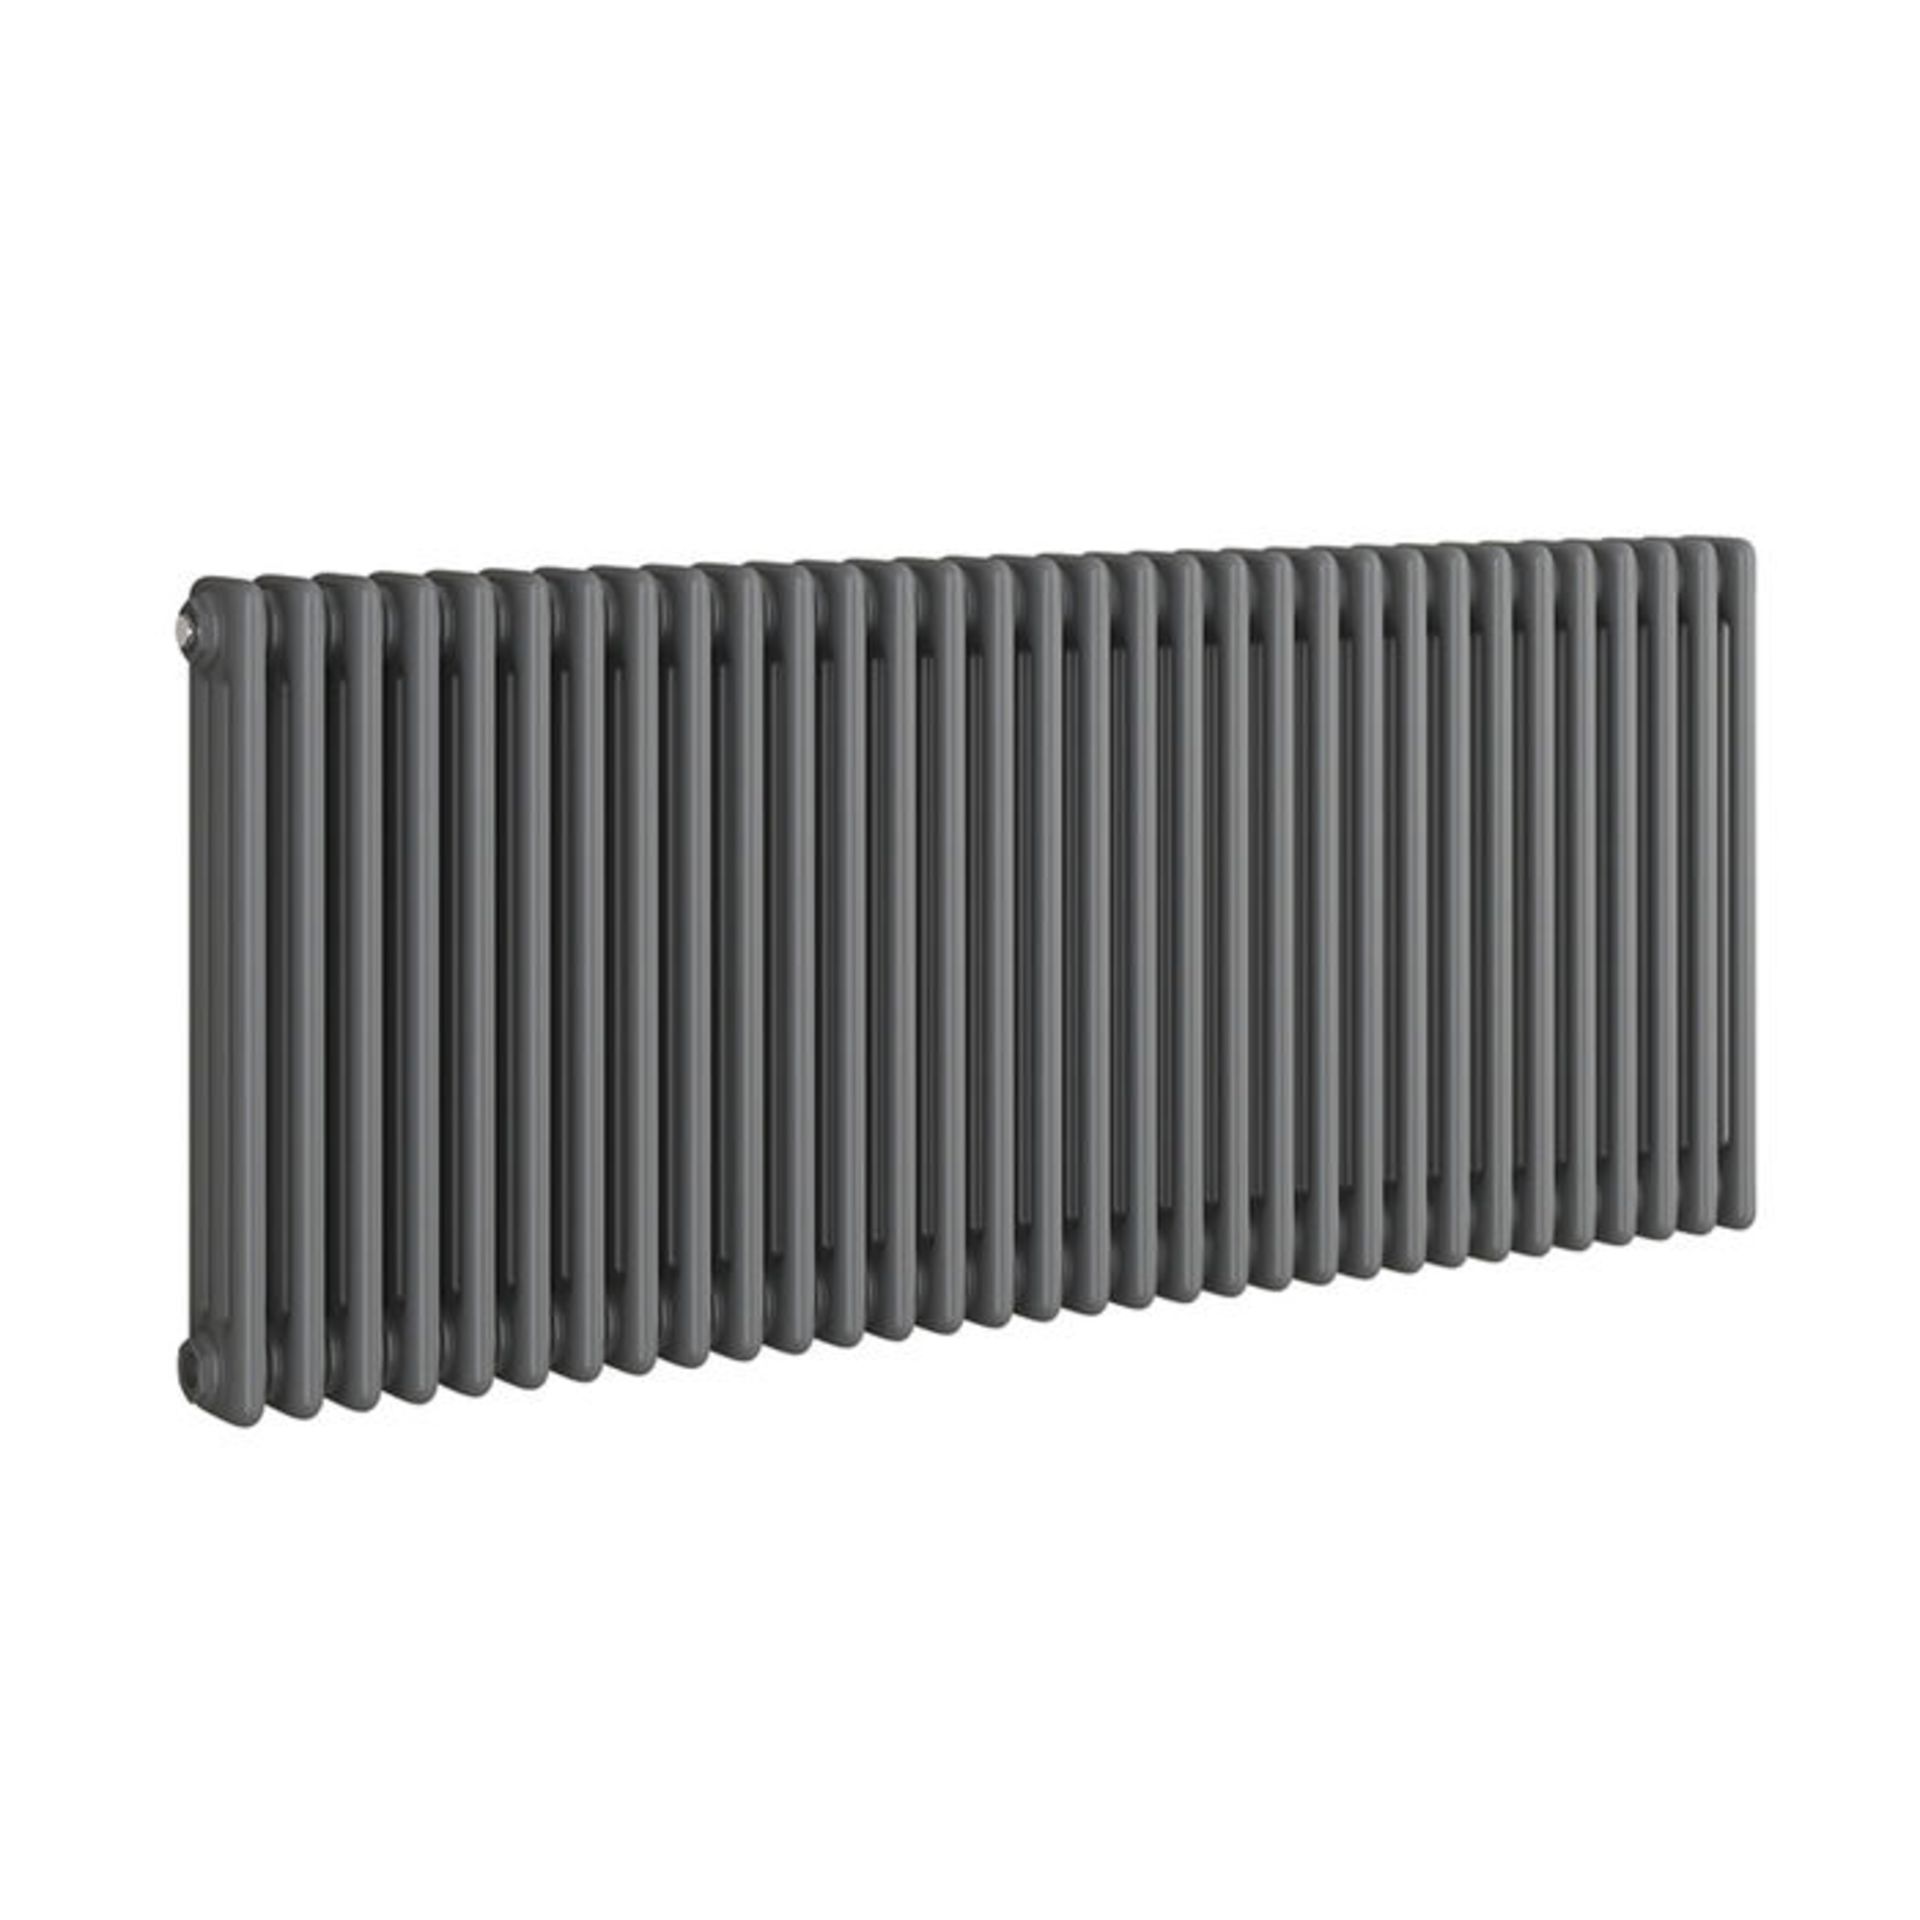 (PT261) 600x1444mm Anthracite Triple Panel Horizontal Colosseum Traditional Radiator. RRP £609.99. - Image 4 of 4